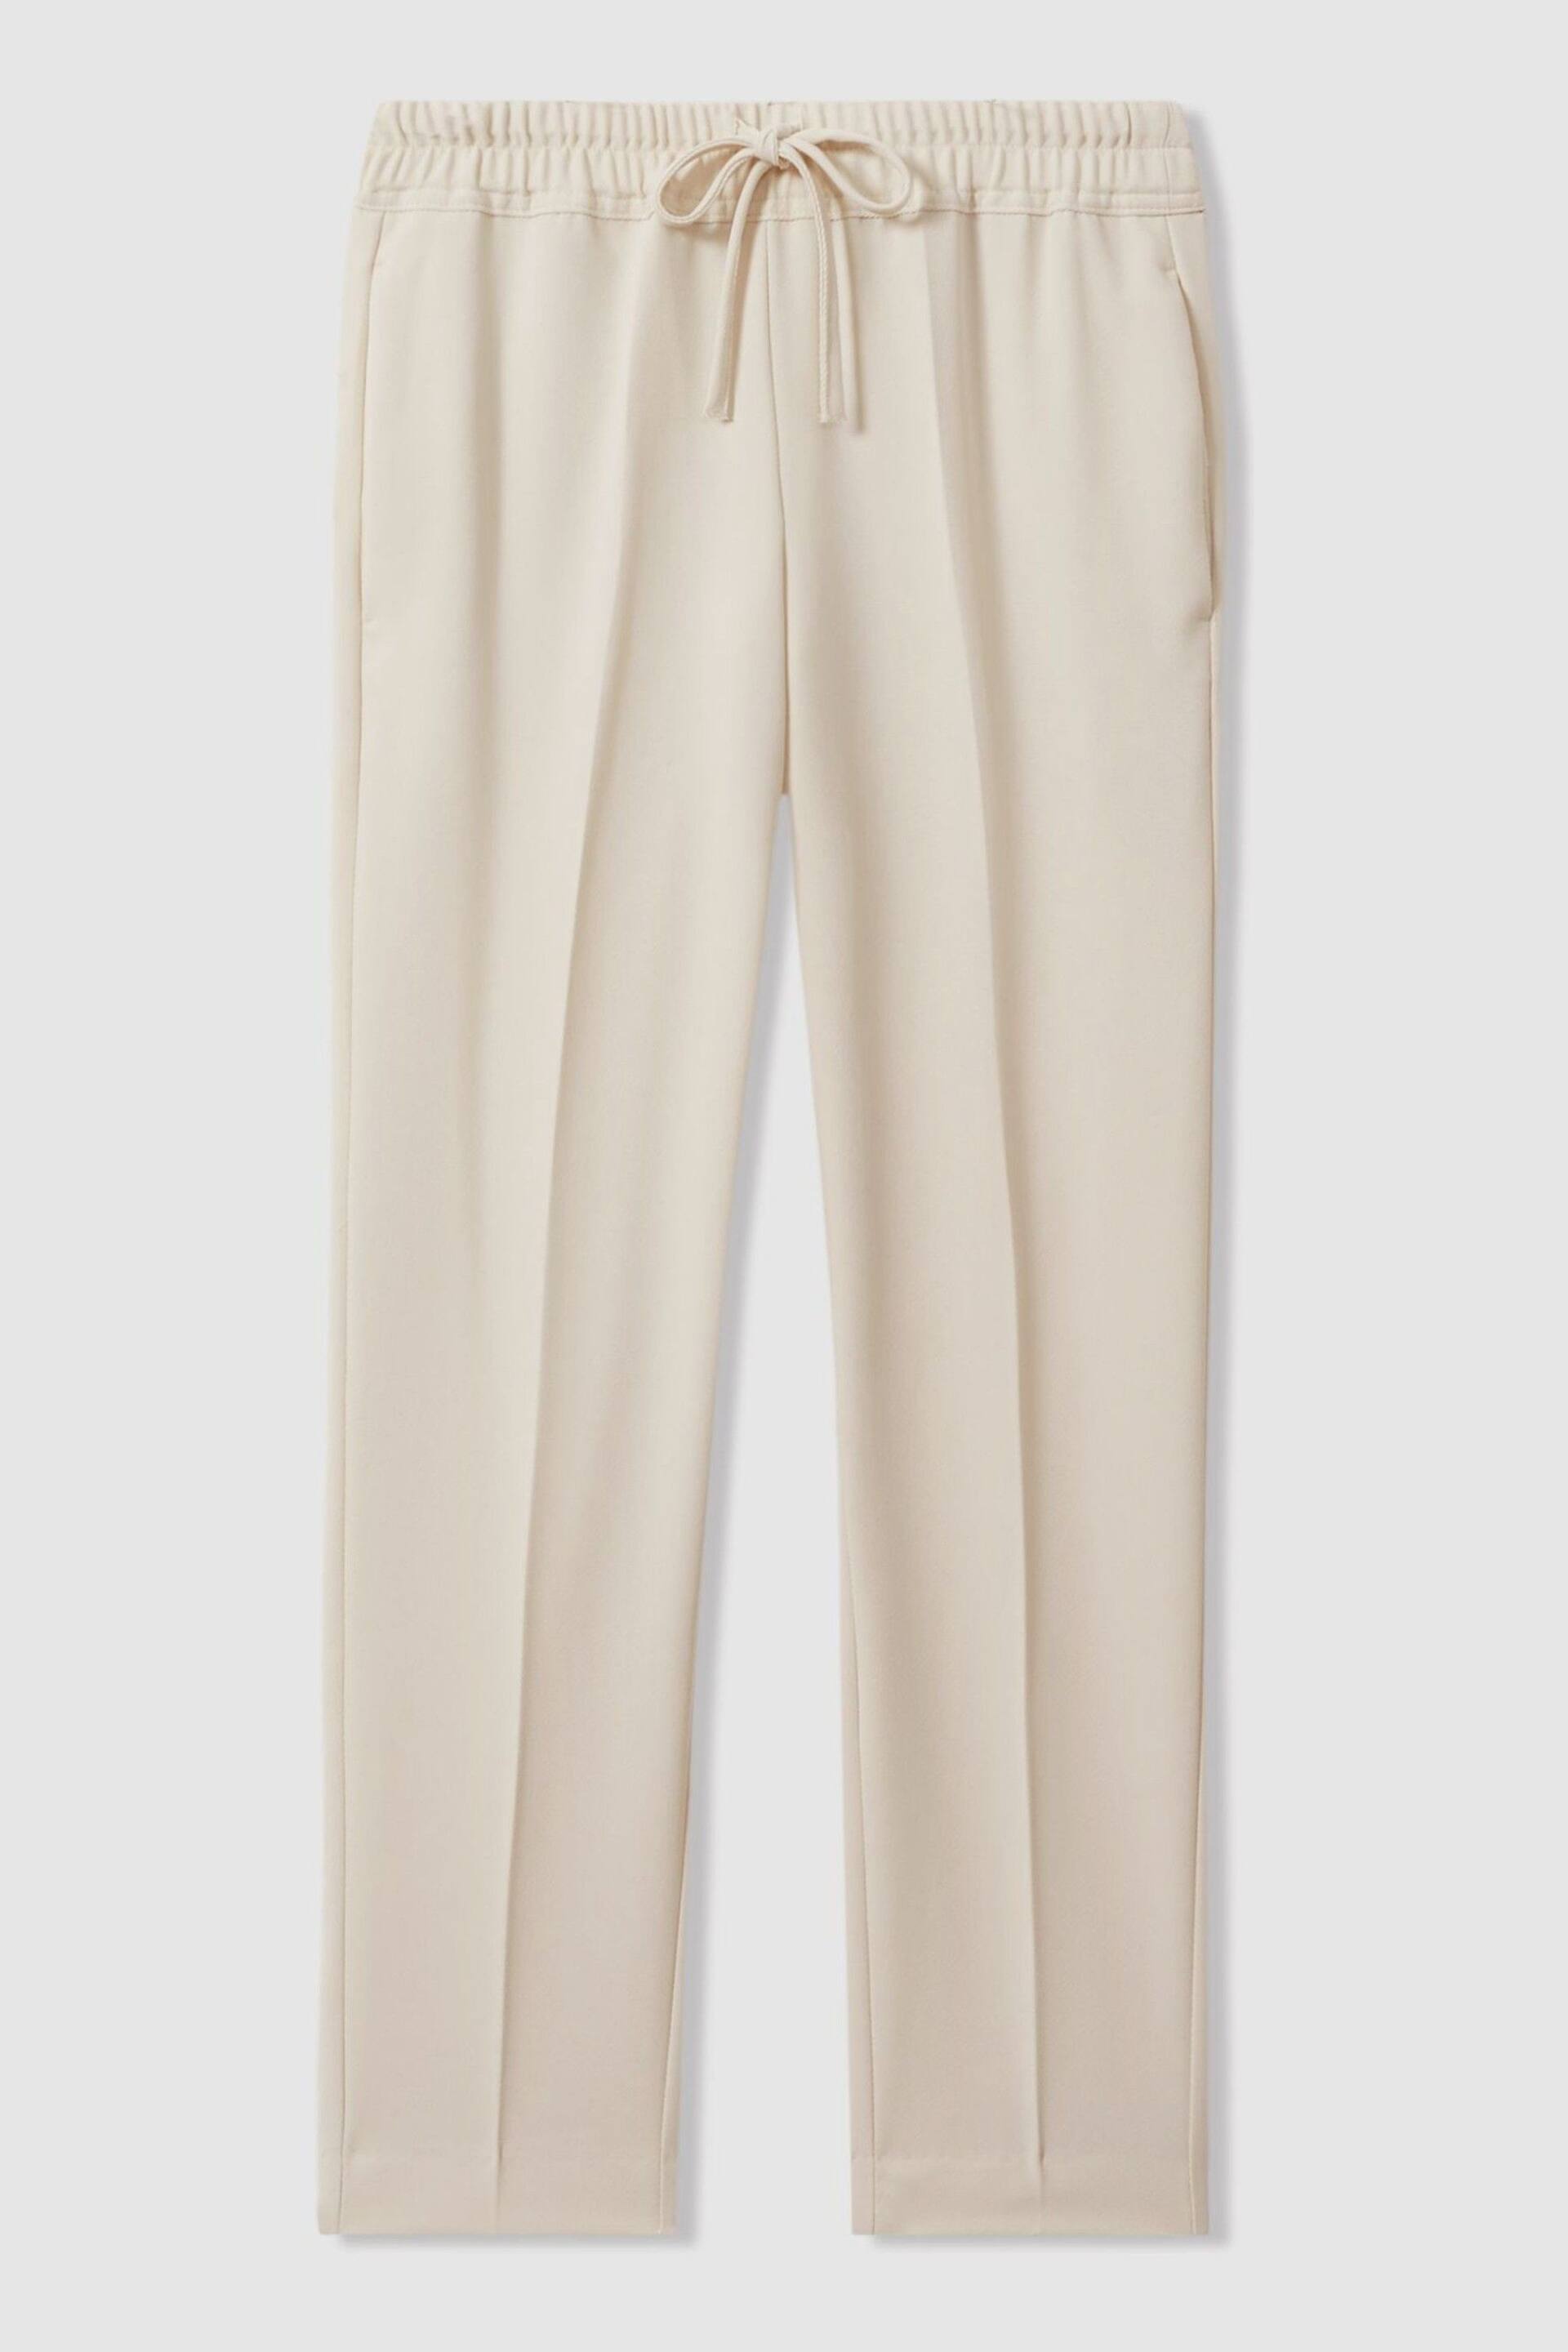 Reiss Cream Hailey Petite Tapered Pull On Trousers - Image 2 of 6